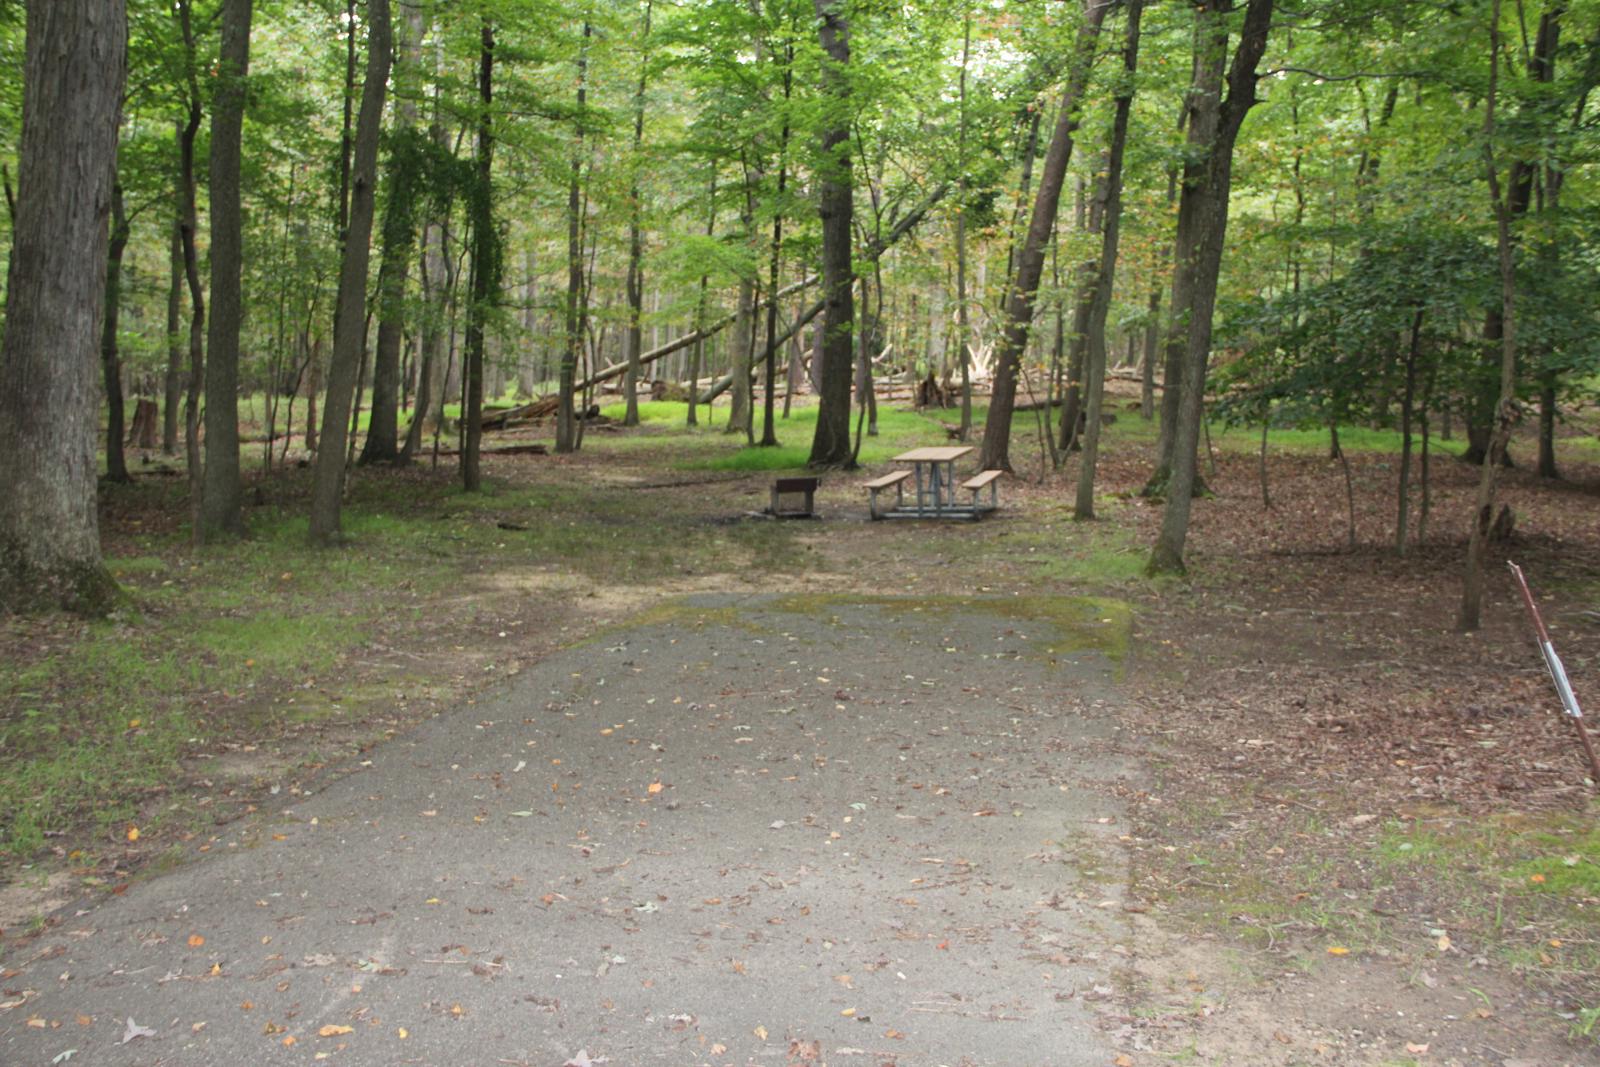 C93 C Loop of the Greenbelt Park Maryland campground